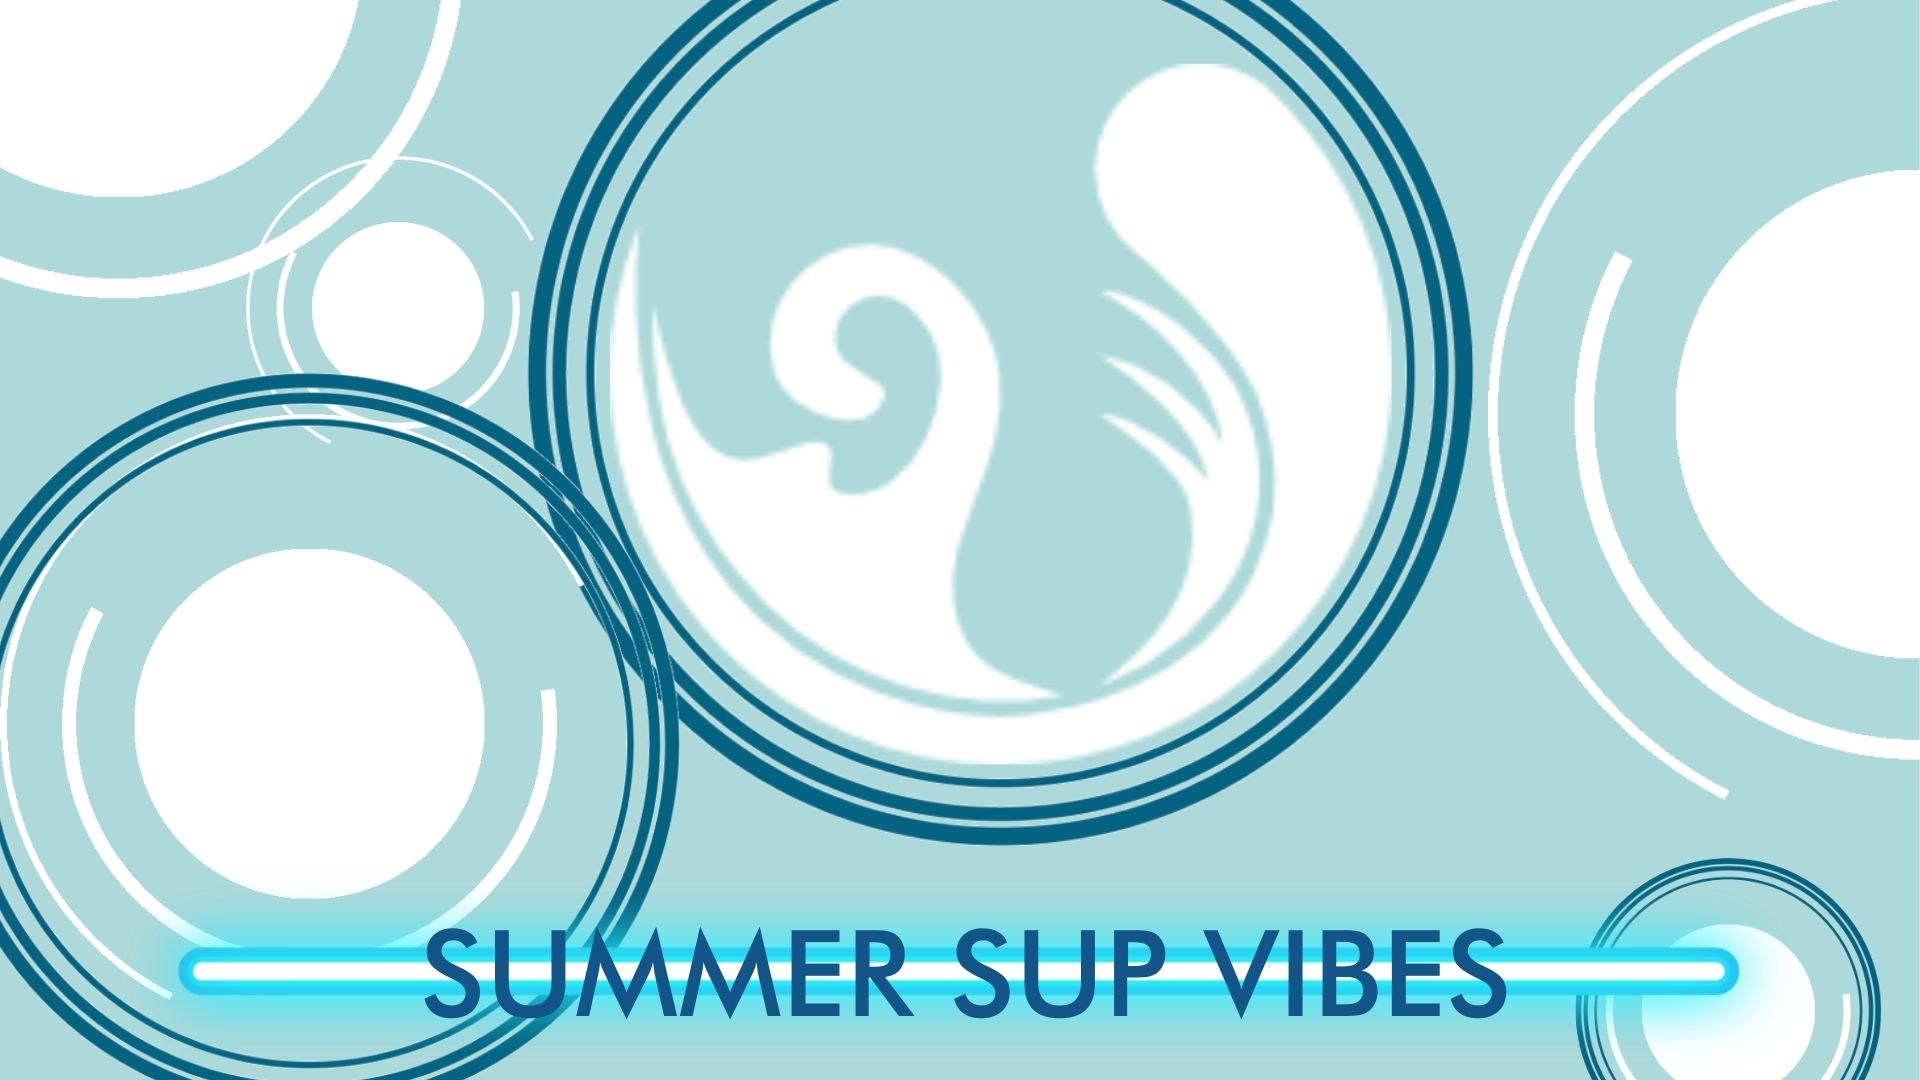 You are currently viewing McConks summer SUP vibes (video).